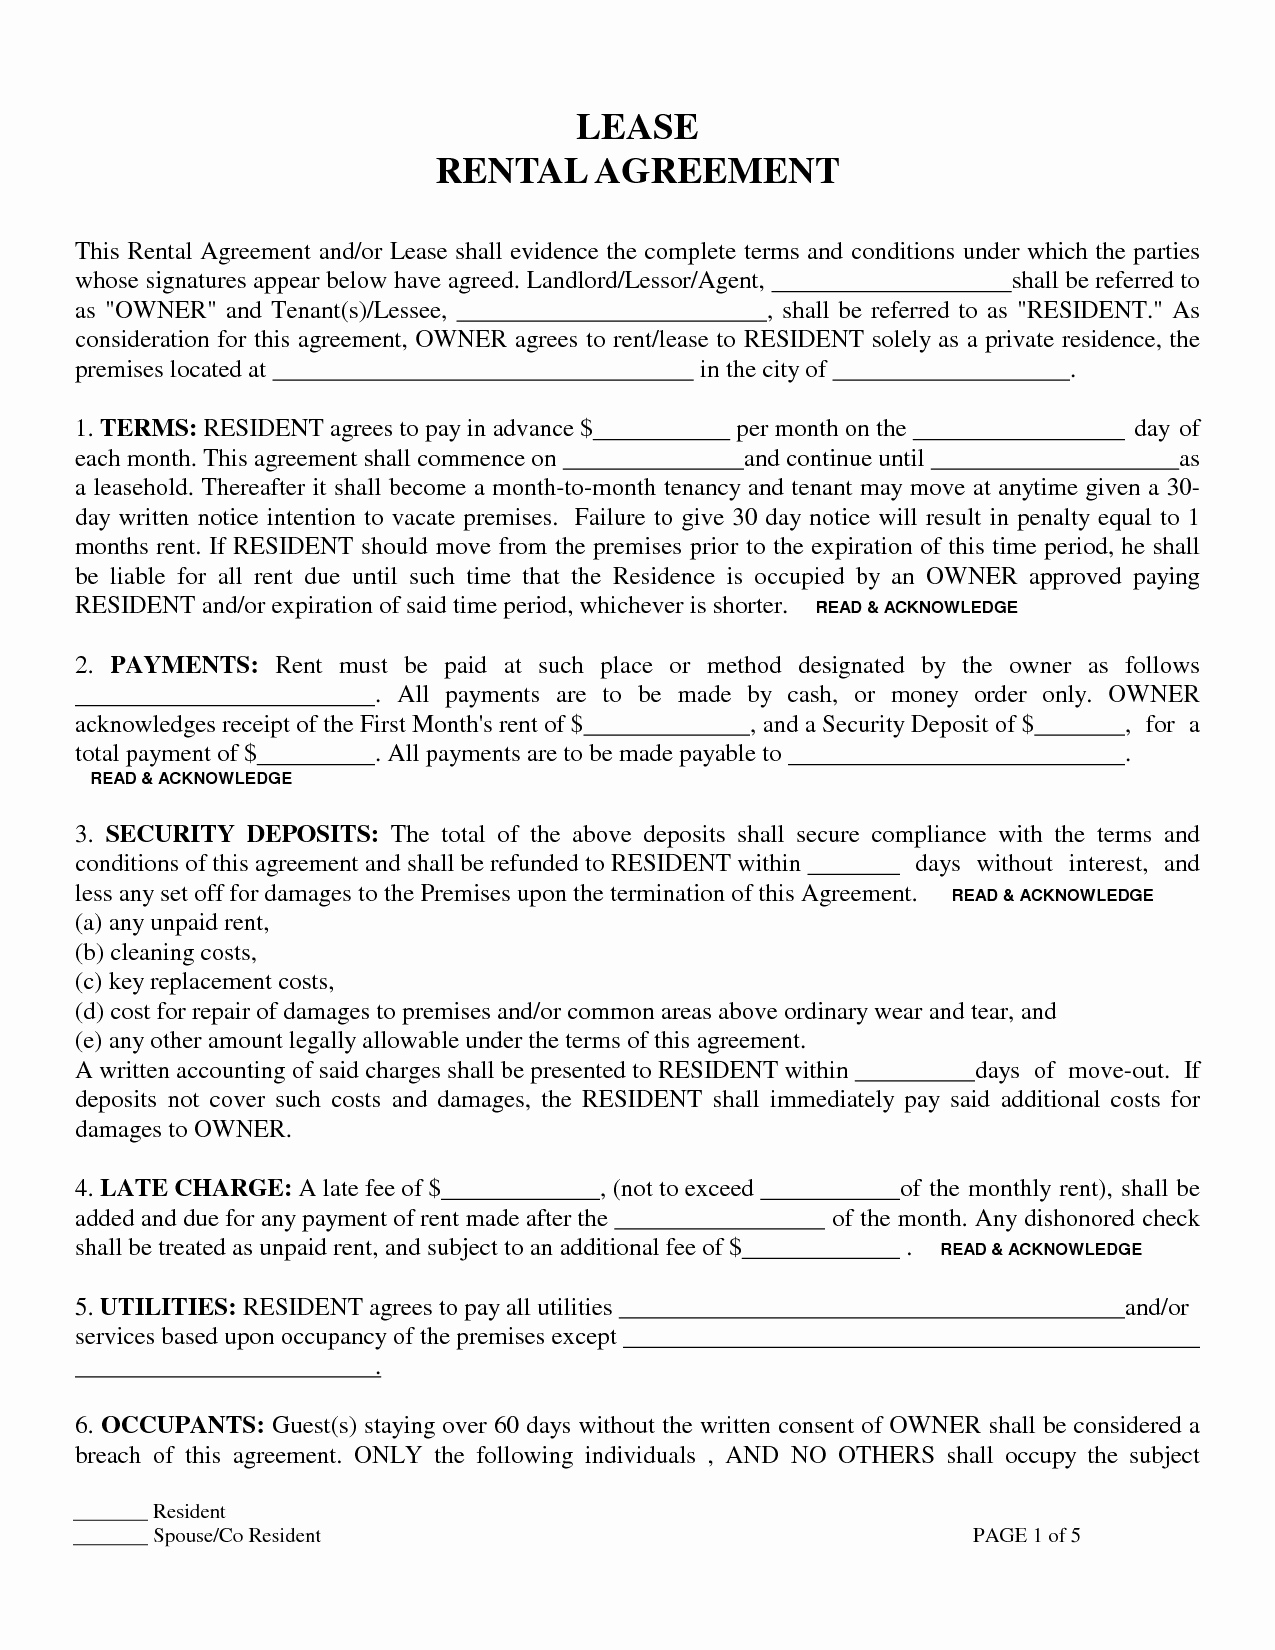 Free Rental Agreement Template Inspirational Printable Sample Residential Lease form